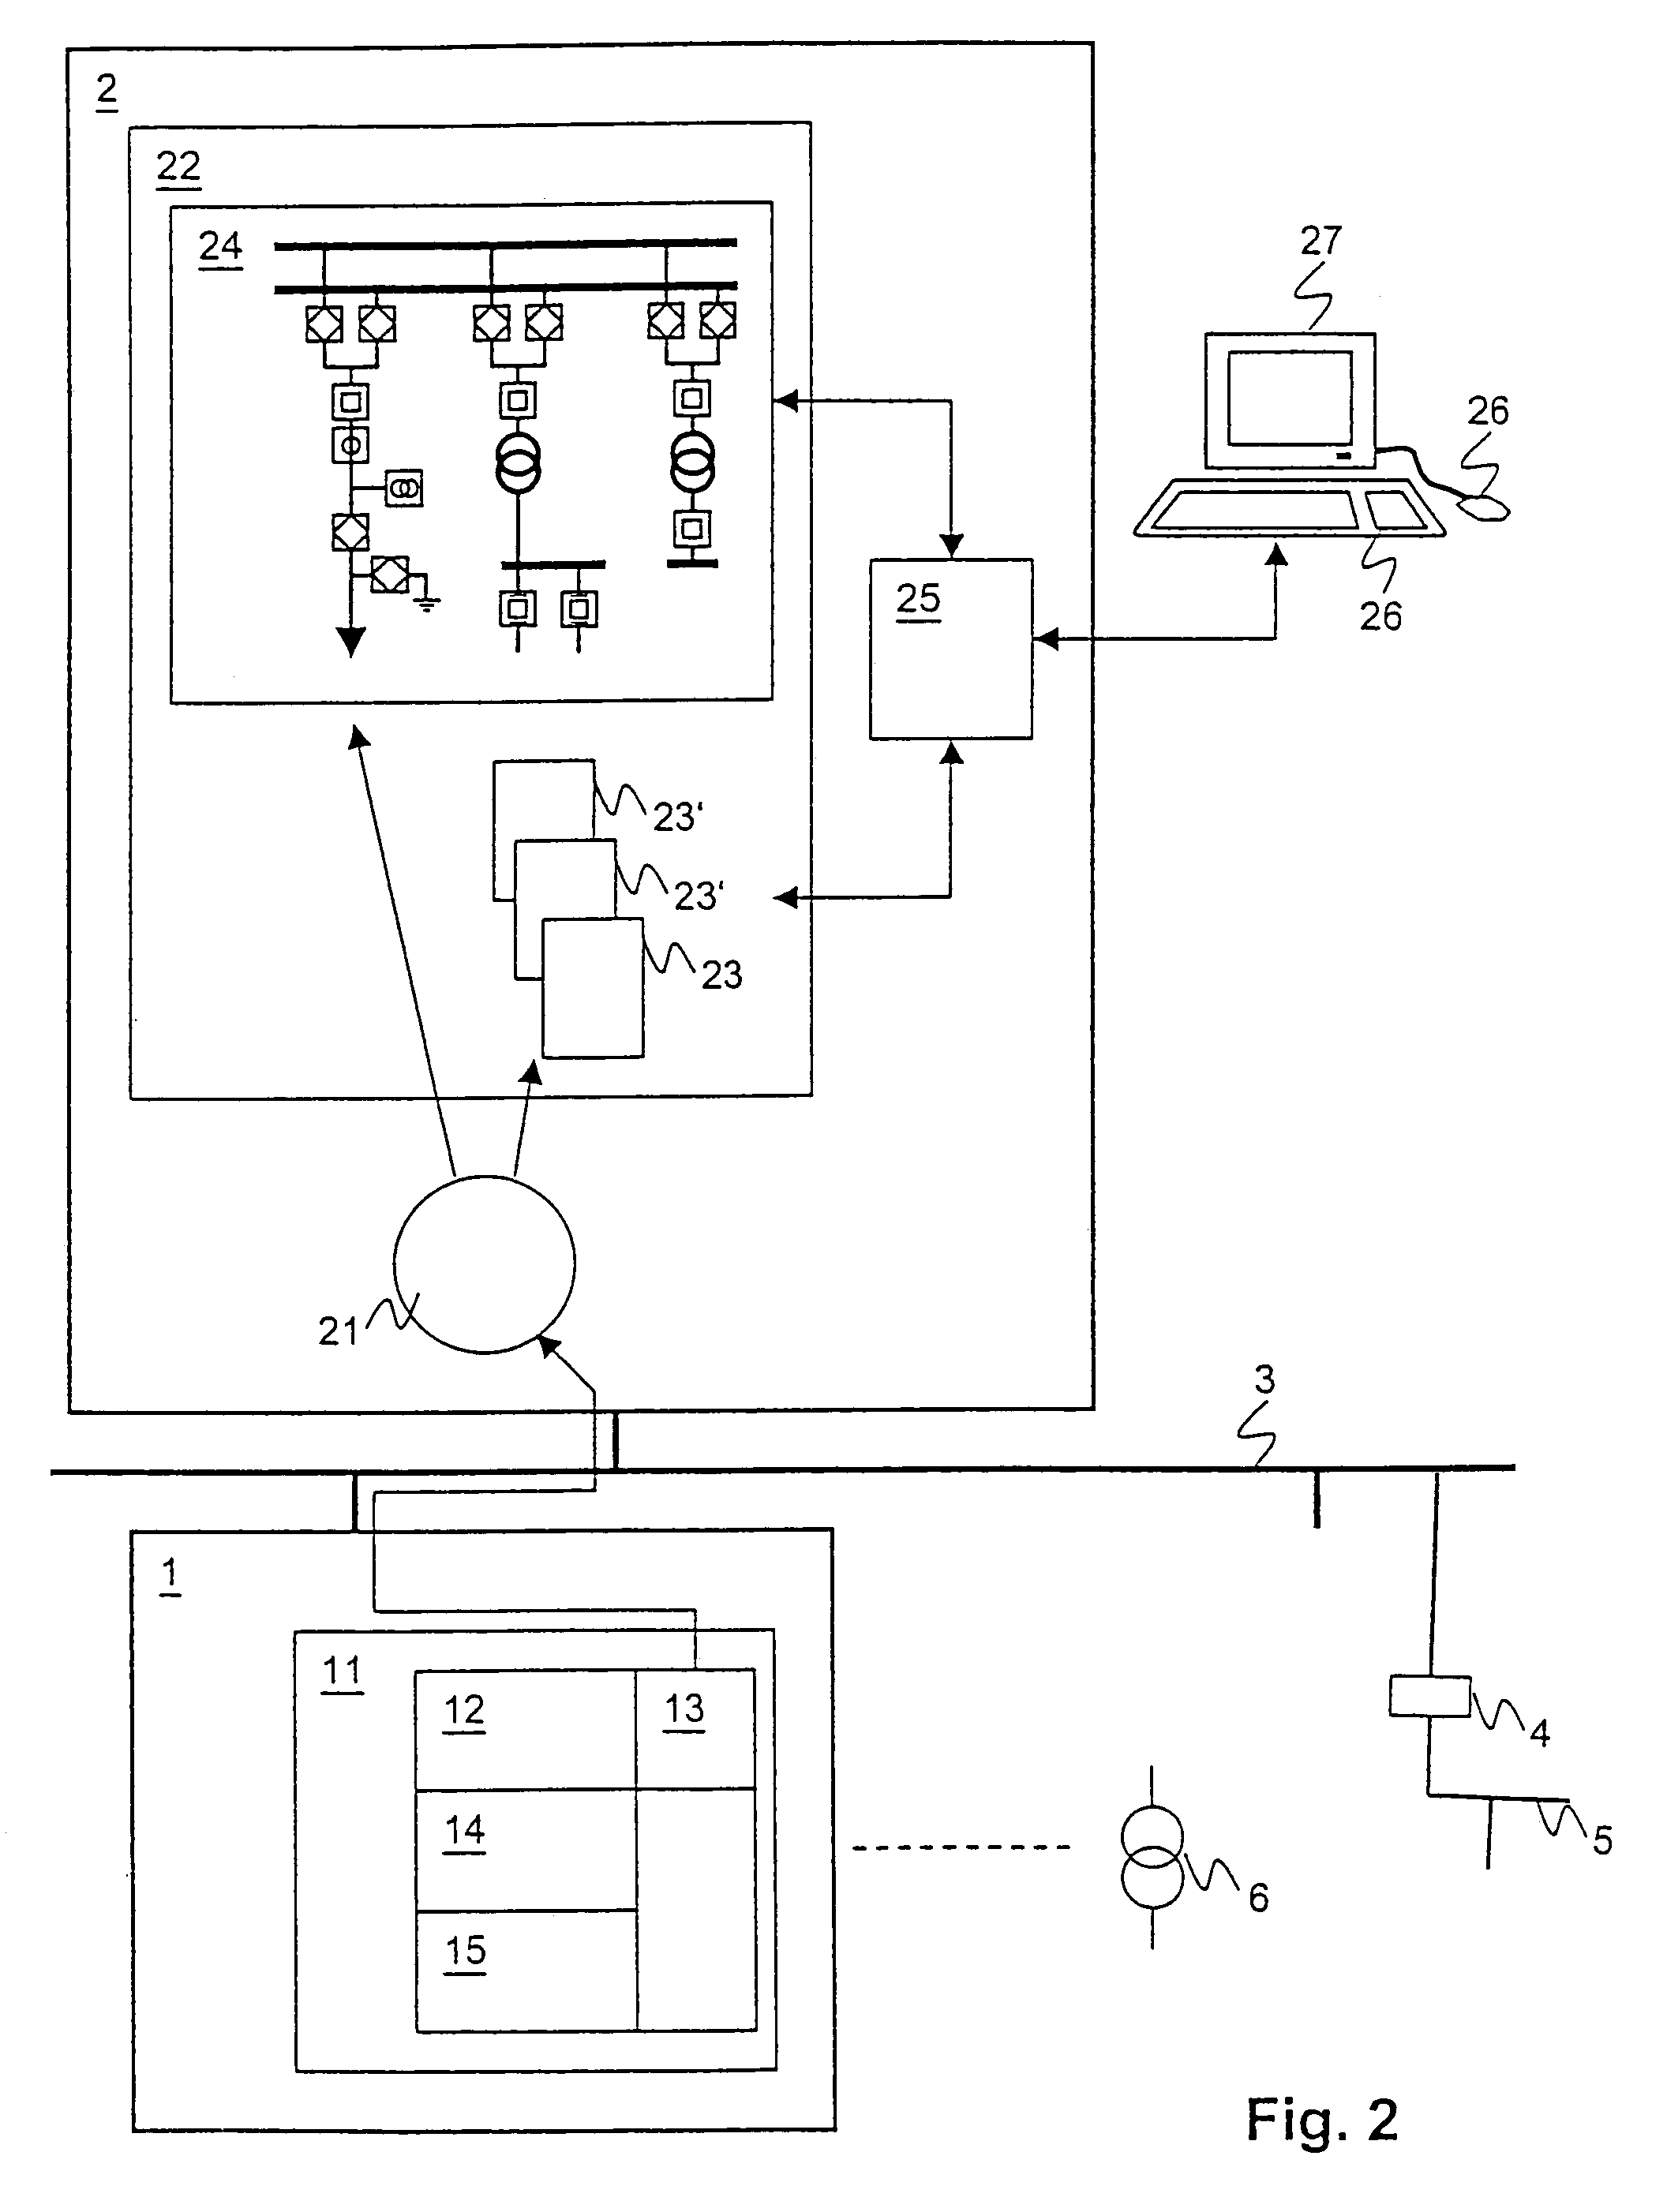 Integration of a field device in an installation control system